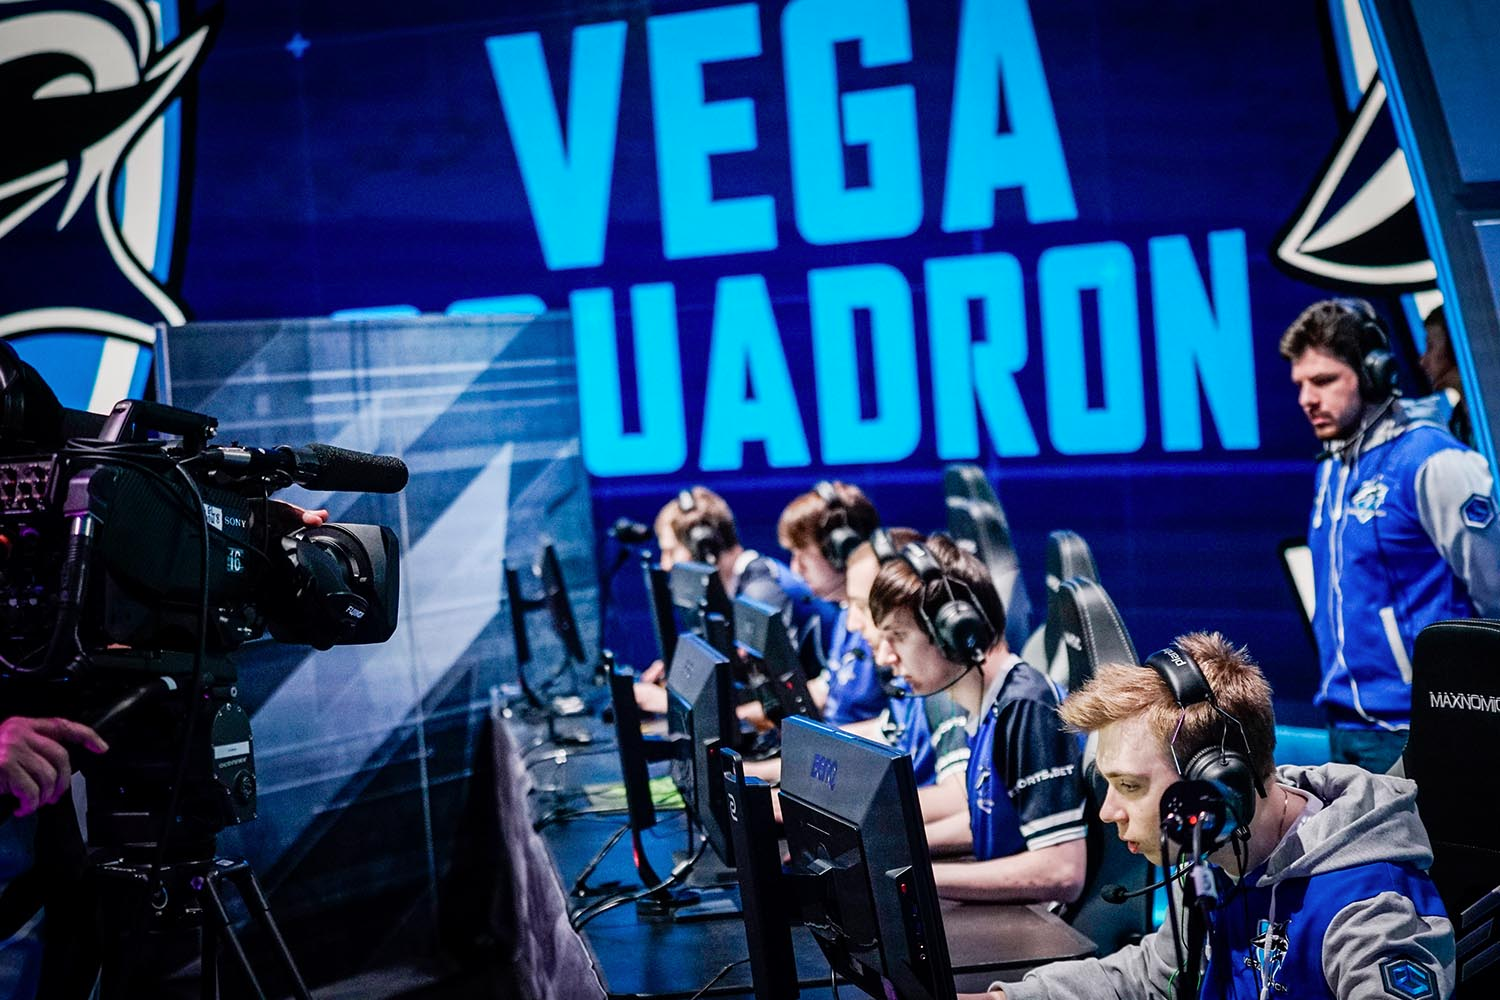 mir stepped up in Atlanta to lead Vega Squadron in his first LAN Major Qualifier. Copyright: ELEAGUE